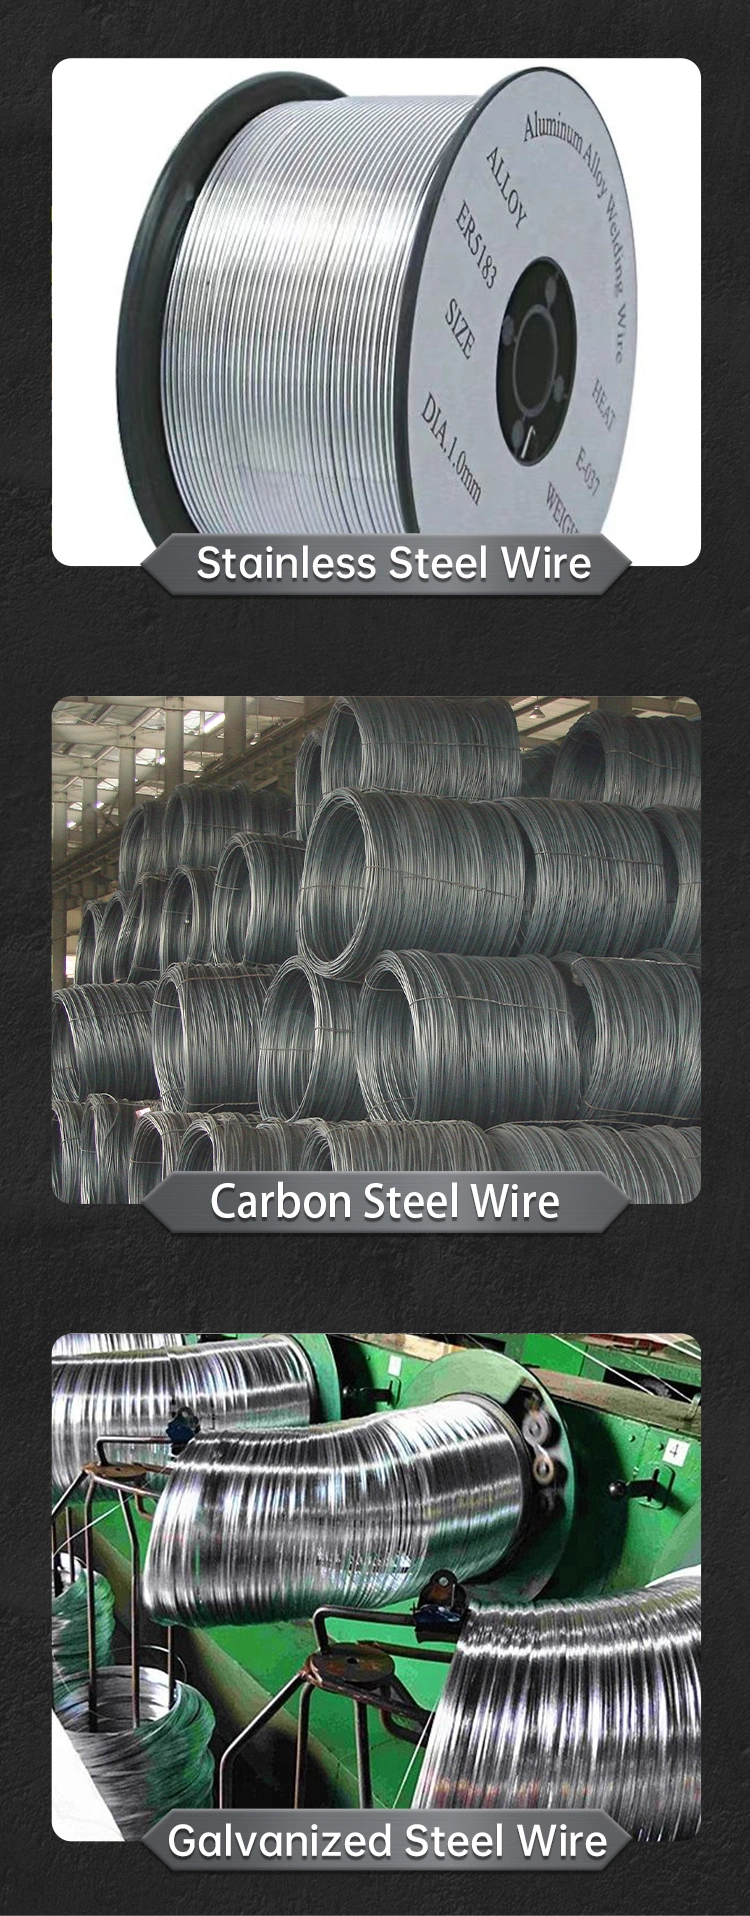 2022 Hot Sale High Quality Stainless Steel Wire (410, 430, 302, 321, 304, 316L, 310S, 321H)